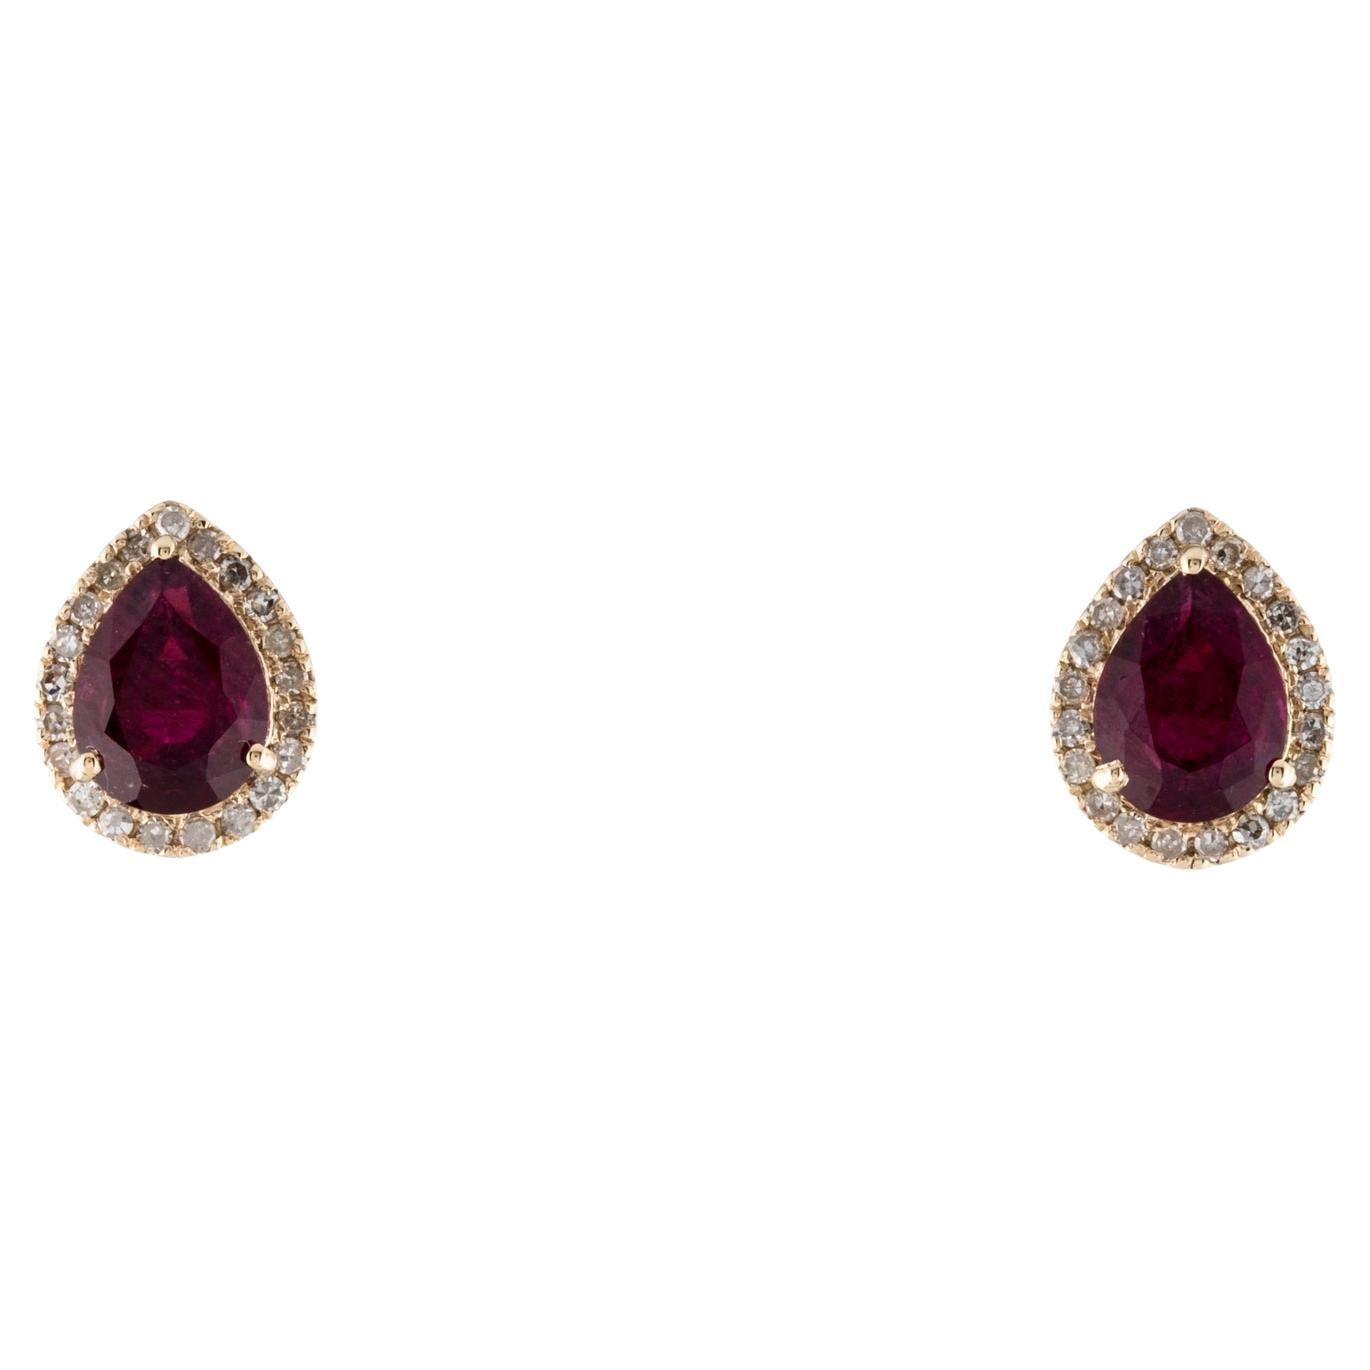 14K Yellow Gold Stud Earrings with 2.25ct Pear-Shaped Tourmaline and Diamond